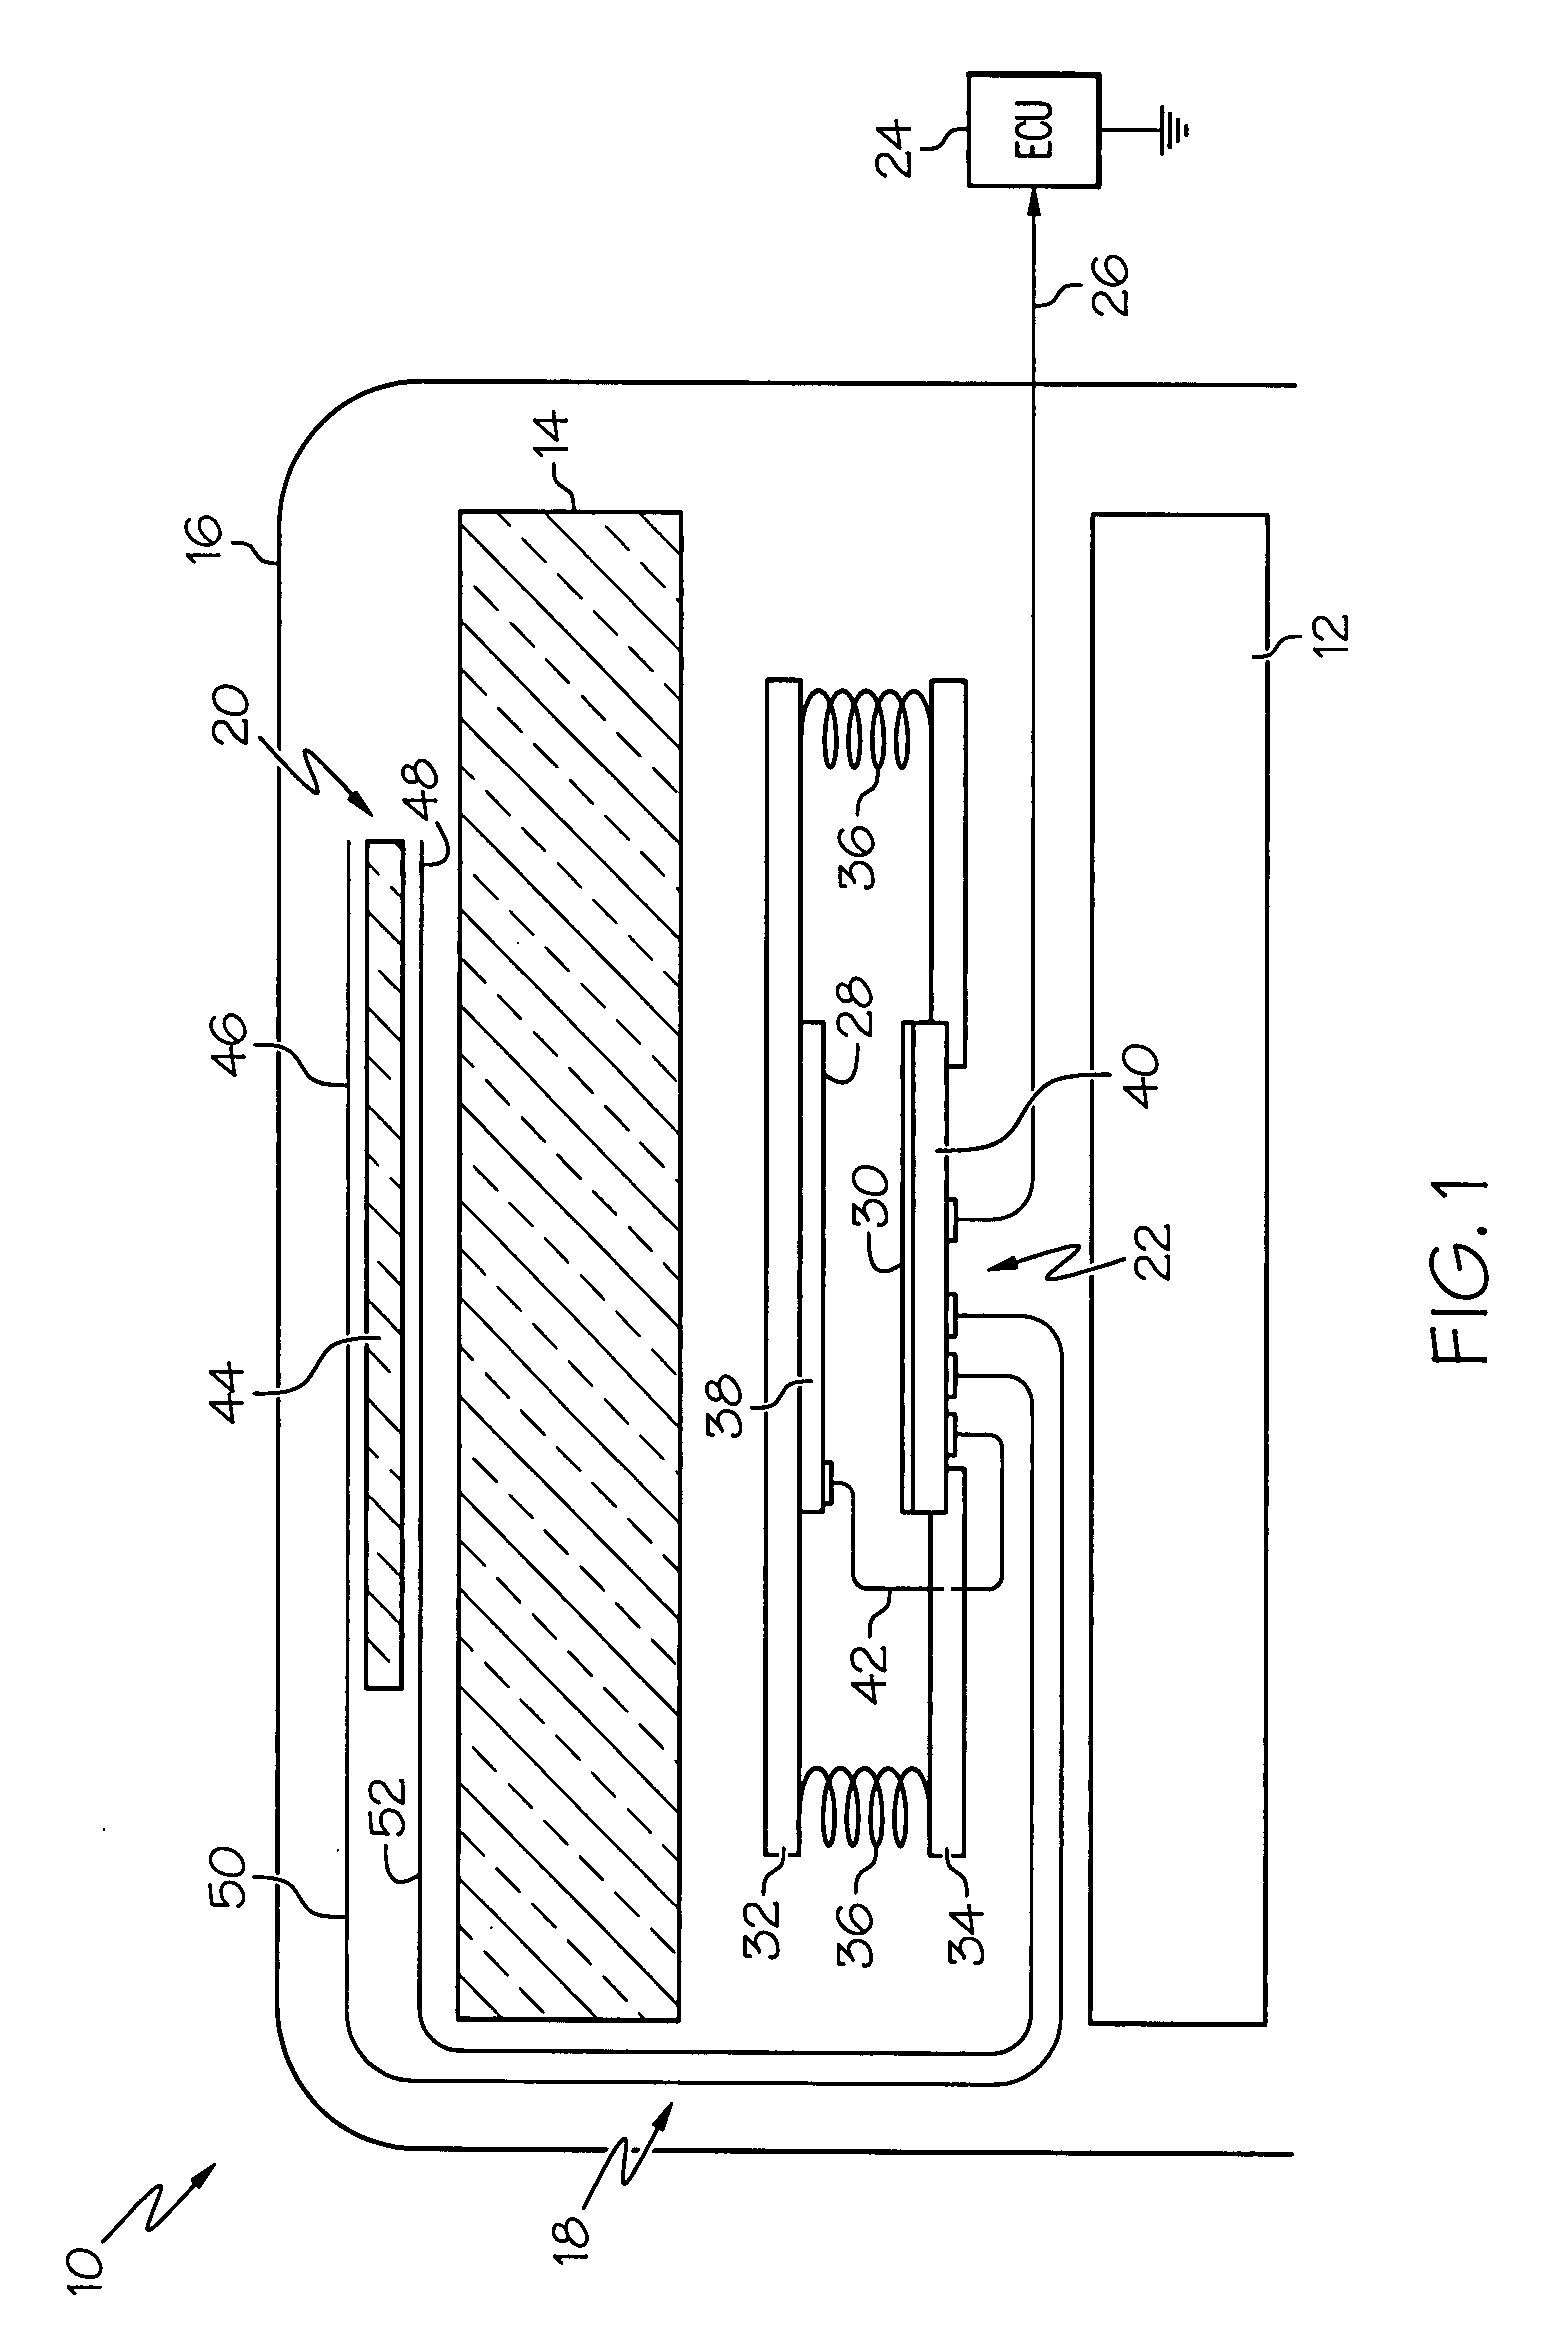 Dual function capacitive sensor for seat occupant detection